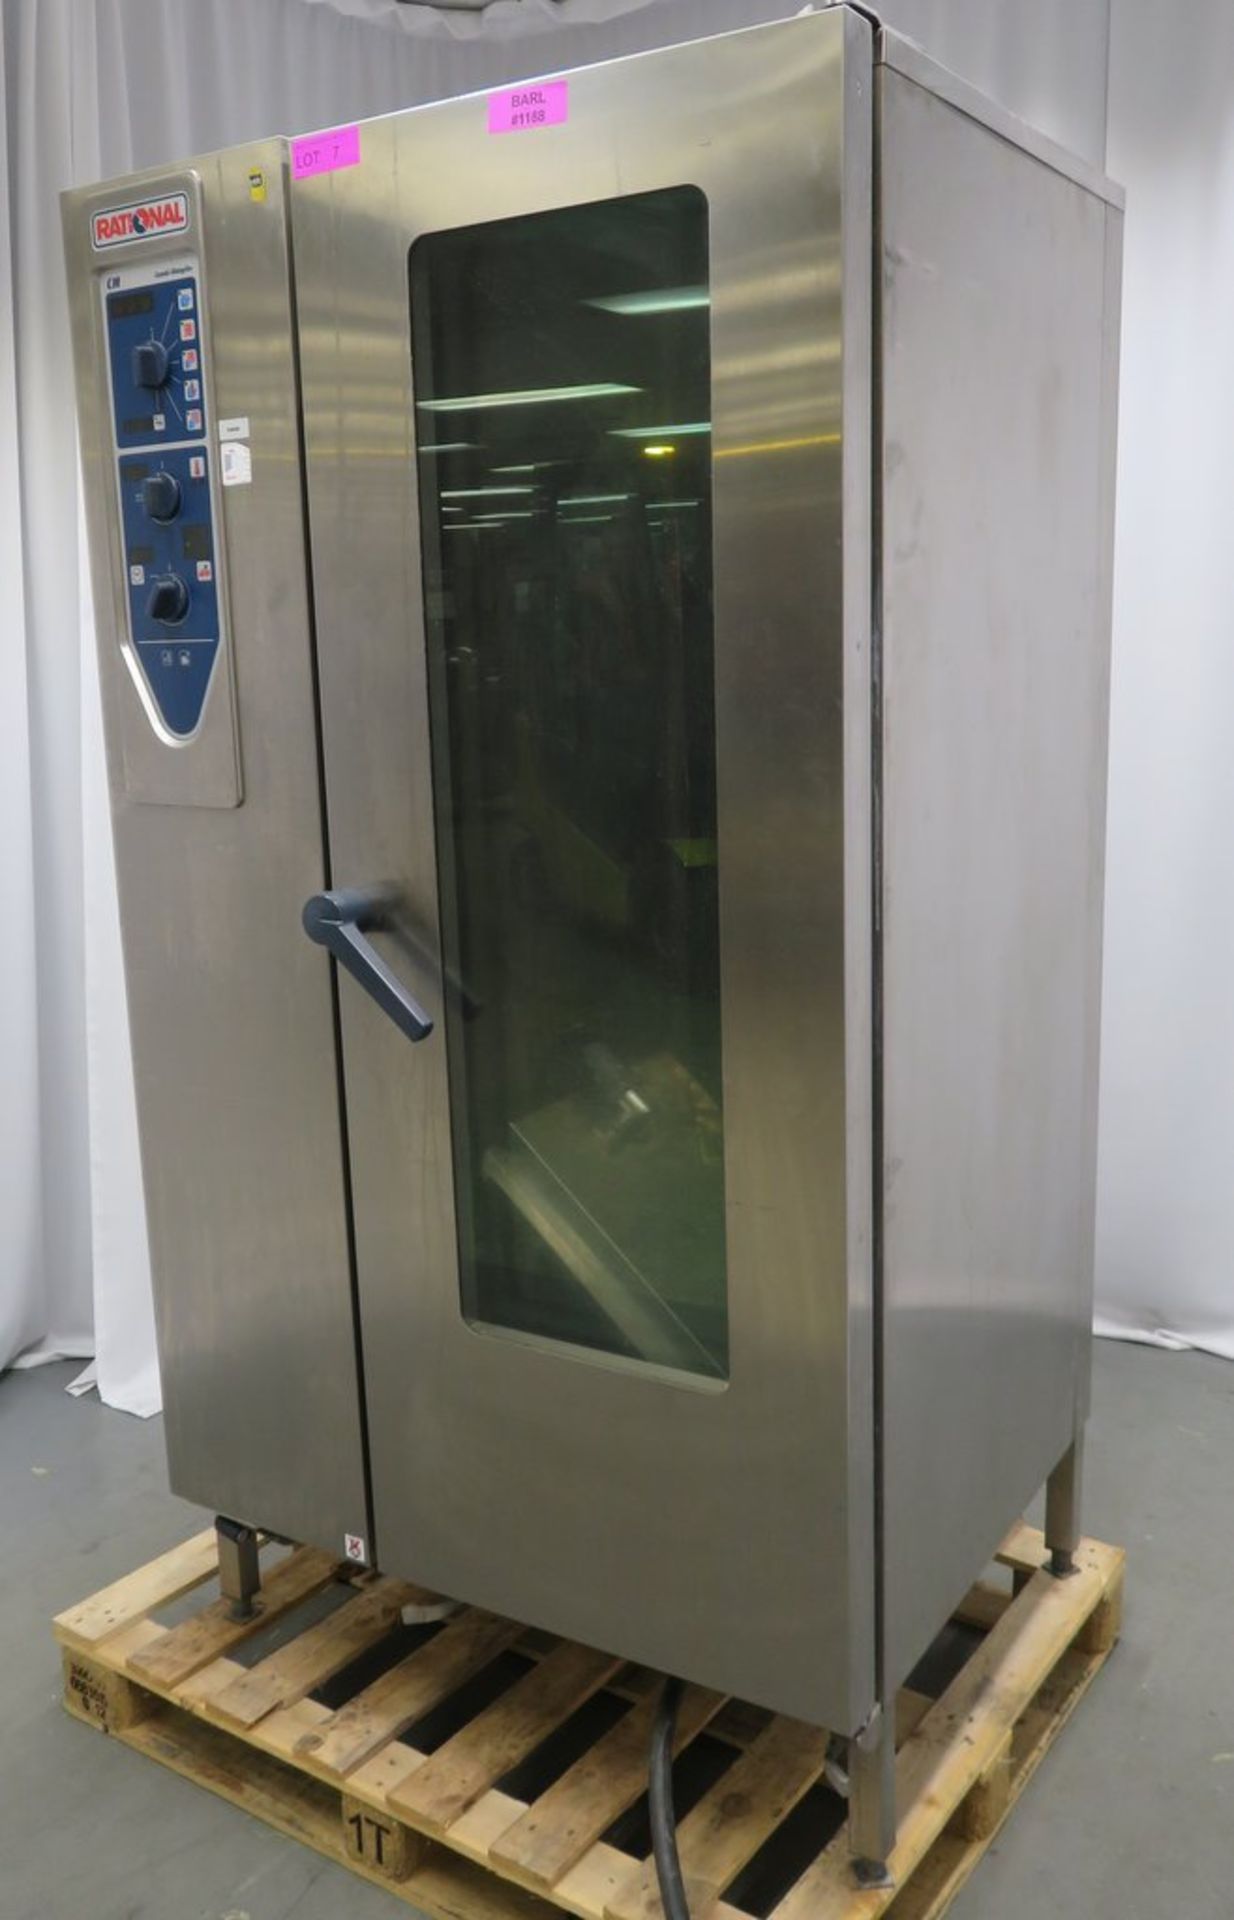 Rational CM 201 Combi-Dampfer 20 grid combi oven, 3 phase electric - Image 3 of 12